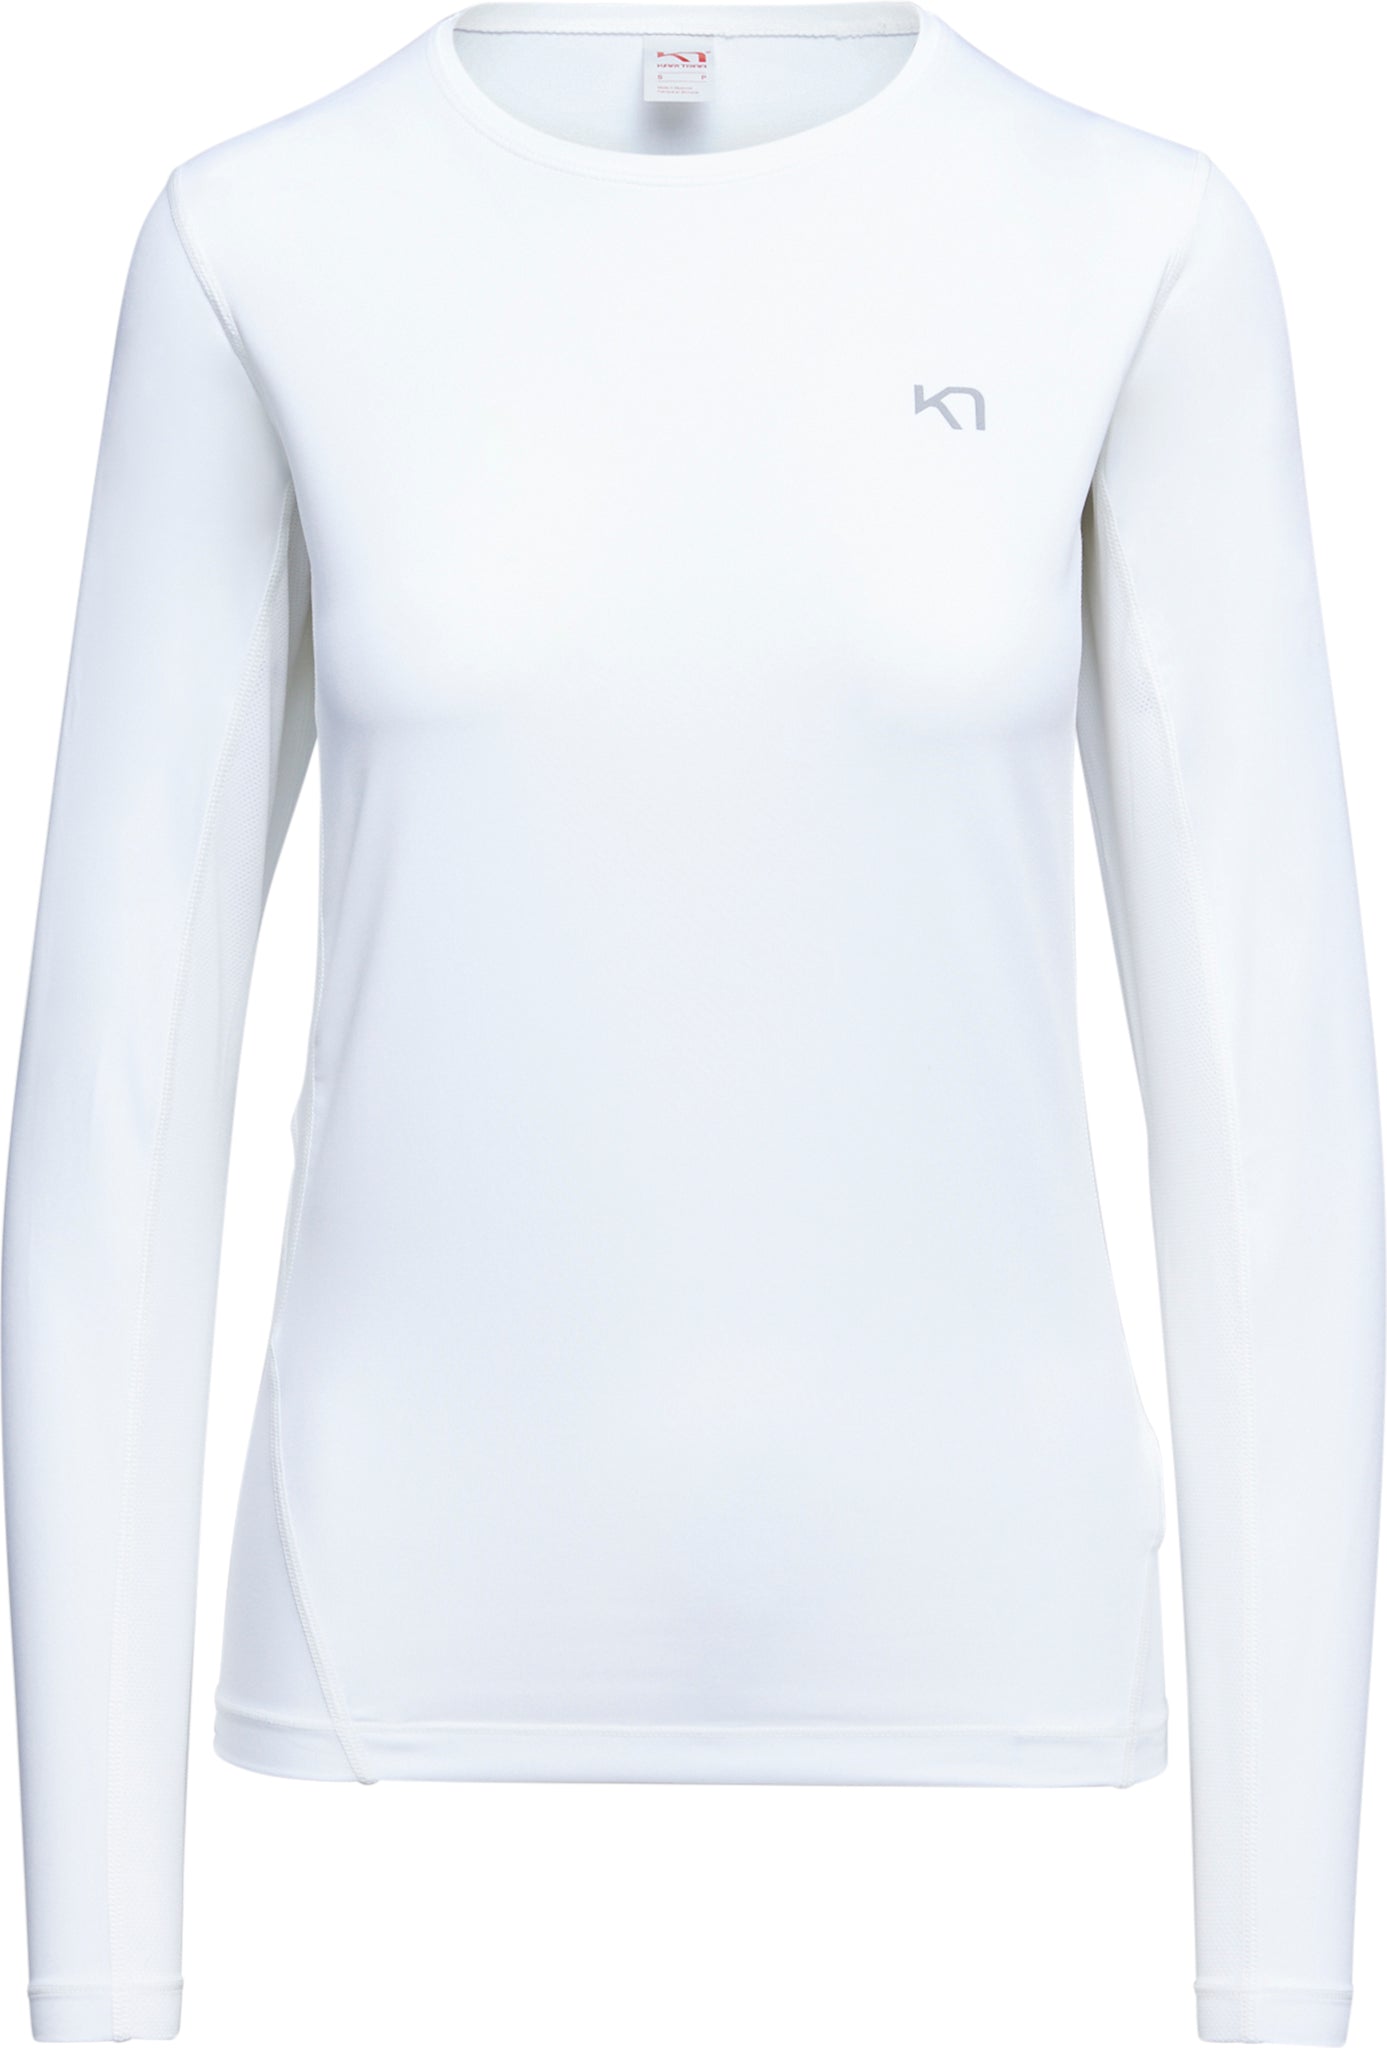 Women's Thermal Long Sleeves Vest Breathable Baselayer